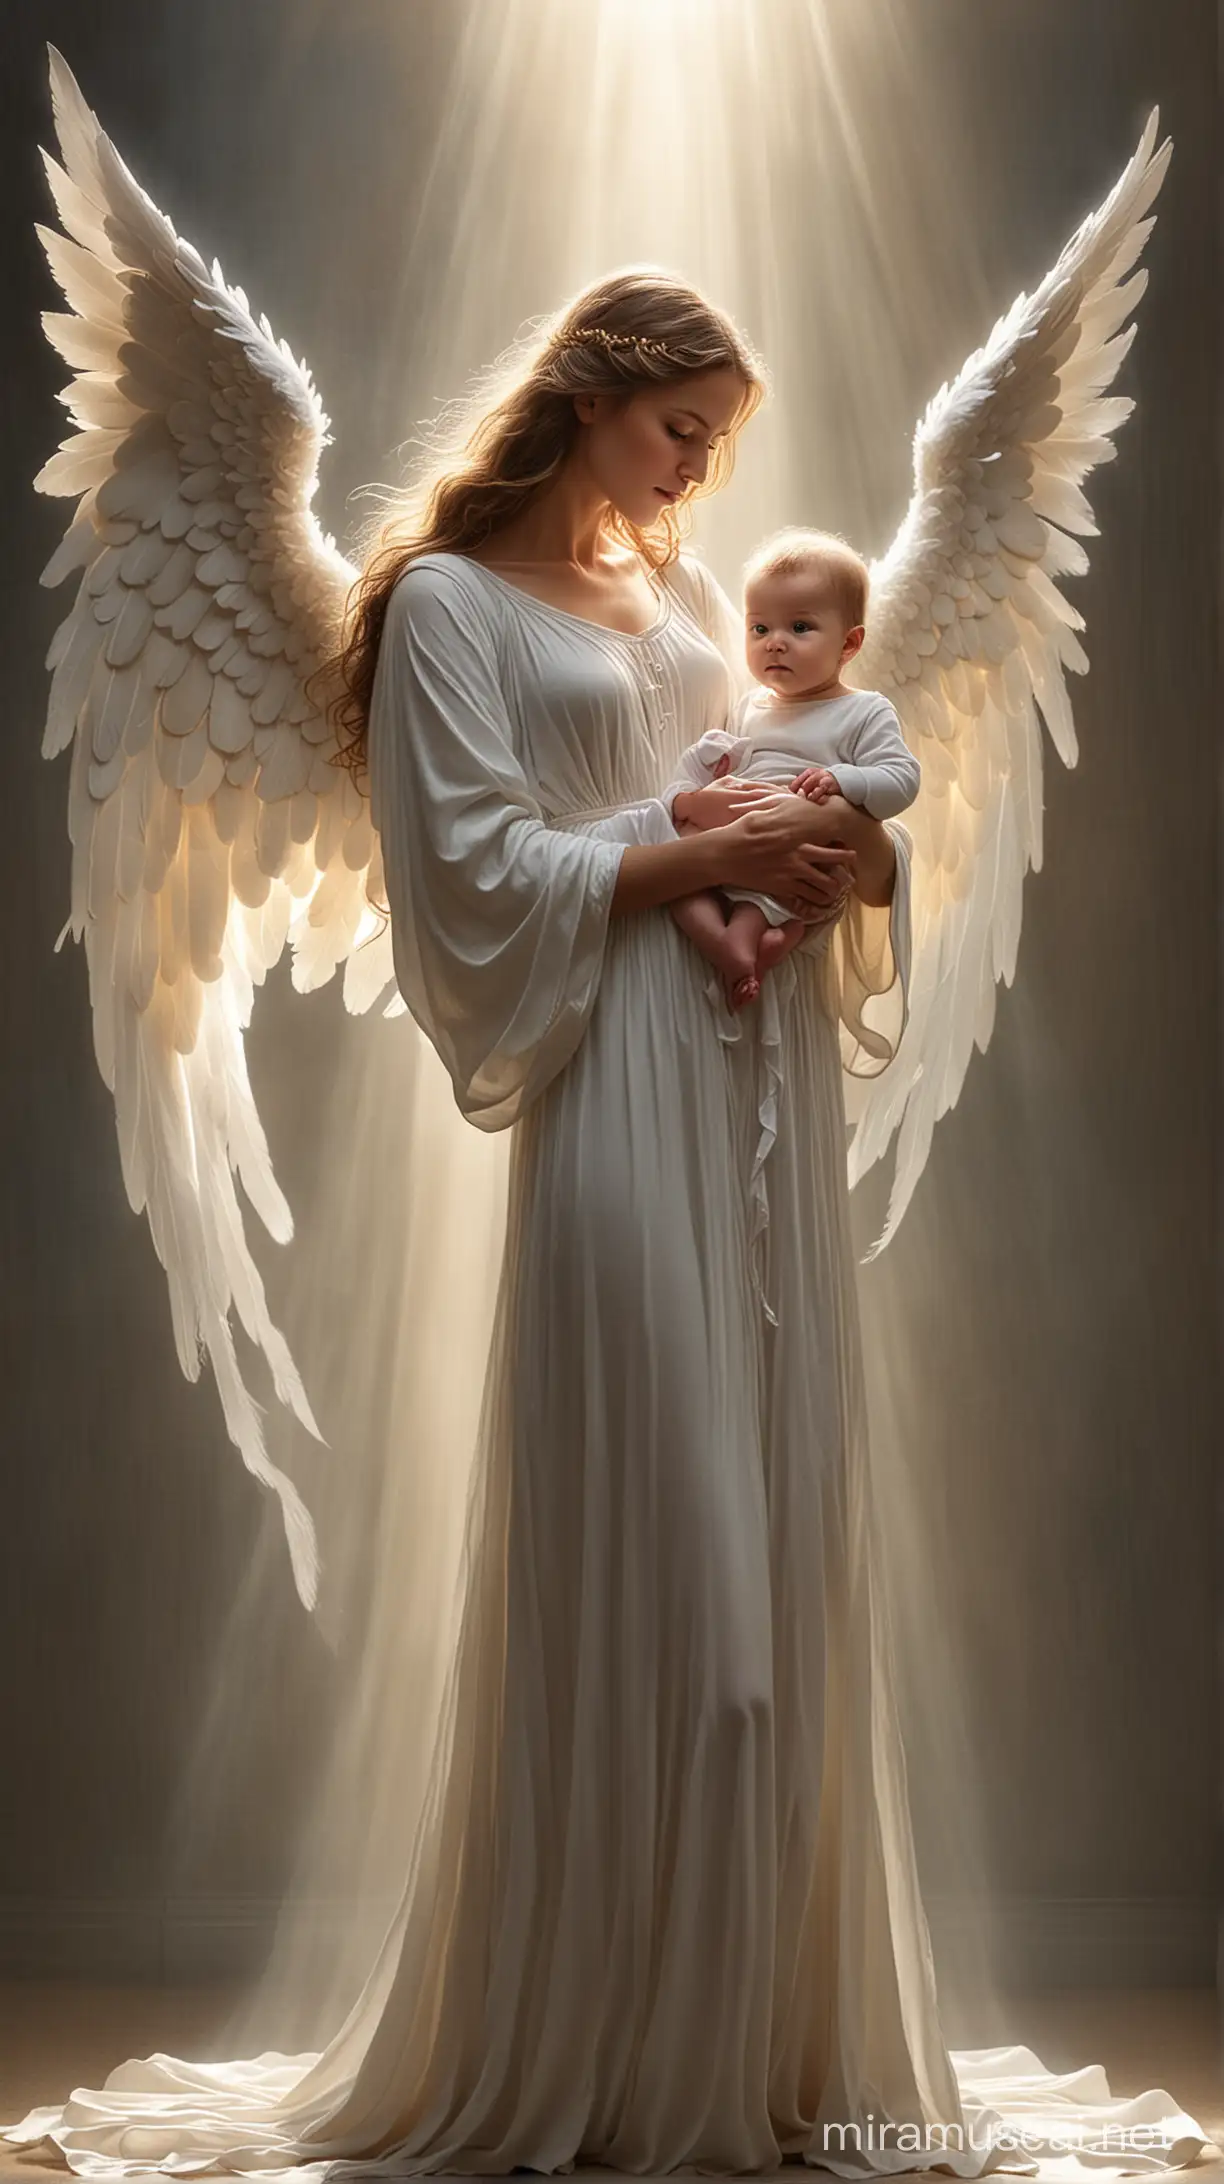 Guardian Angel Protecting Infant with Illuminated Hands